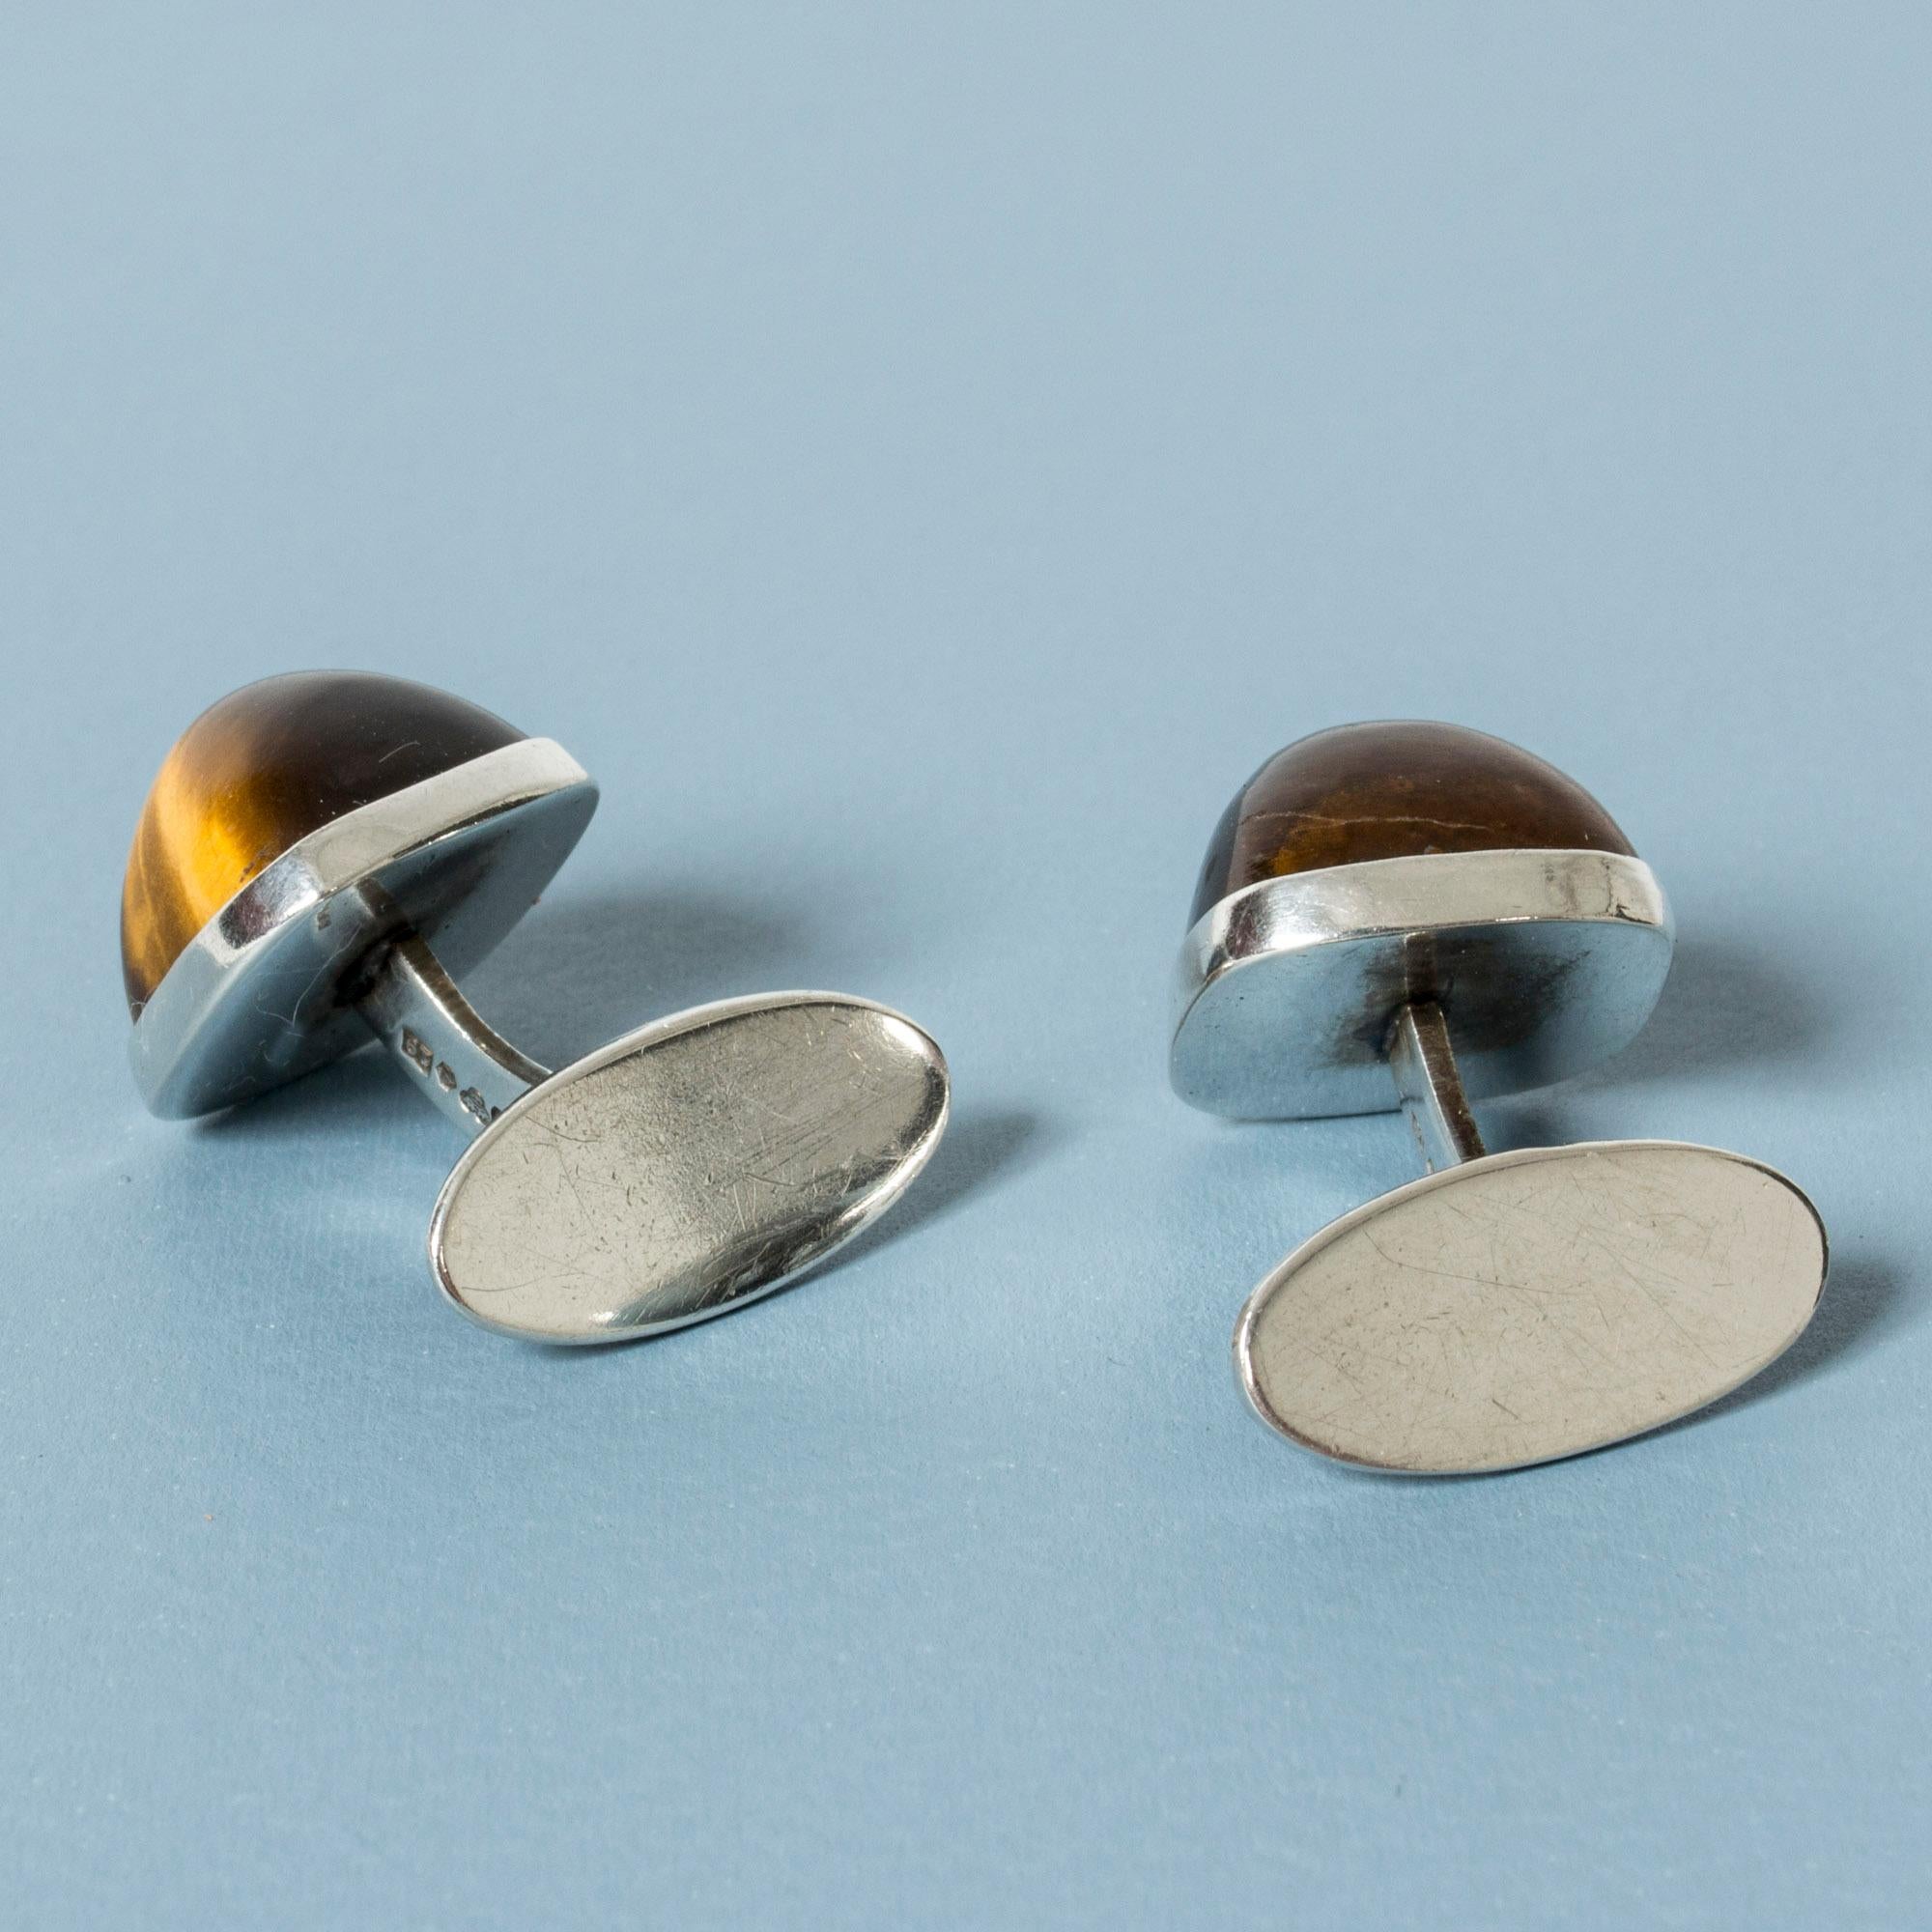 Cabochon Pair of Silver and Tigereye Cufflinks from Kaplans, Sweden